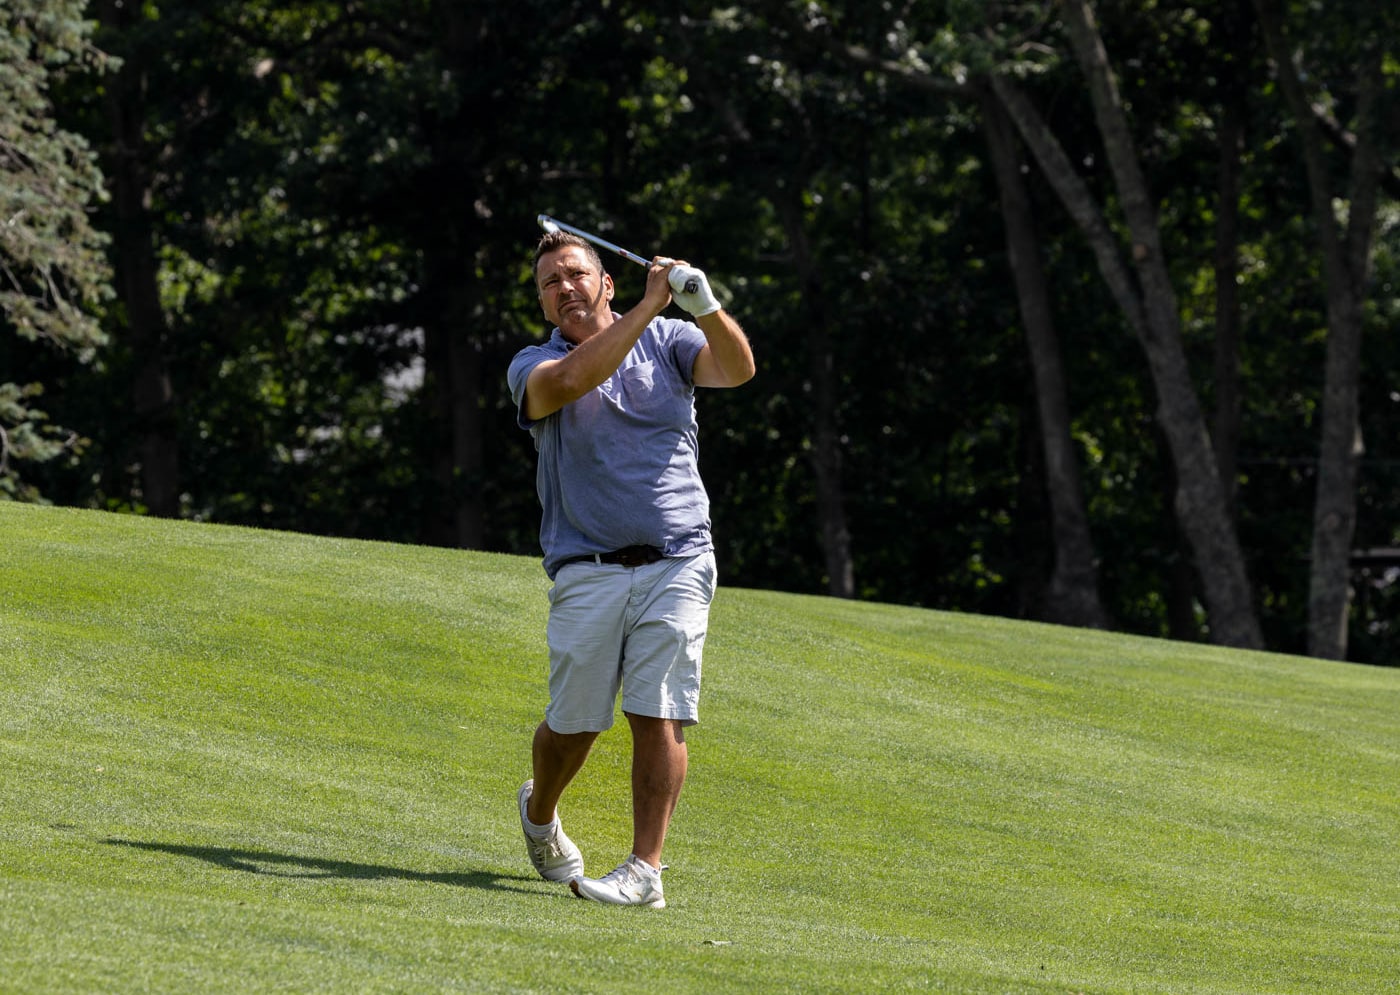 Country-Club-Of-New-Bedford FB-2023-Mens-FB-Gallery August-2023-Country-Club-Of-New-Bedford-FB-2023-Mens-FB-Gallery August-2023-Mens-FB-Gallery-Friday-Photos-Image-29